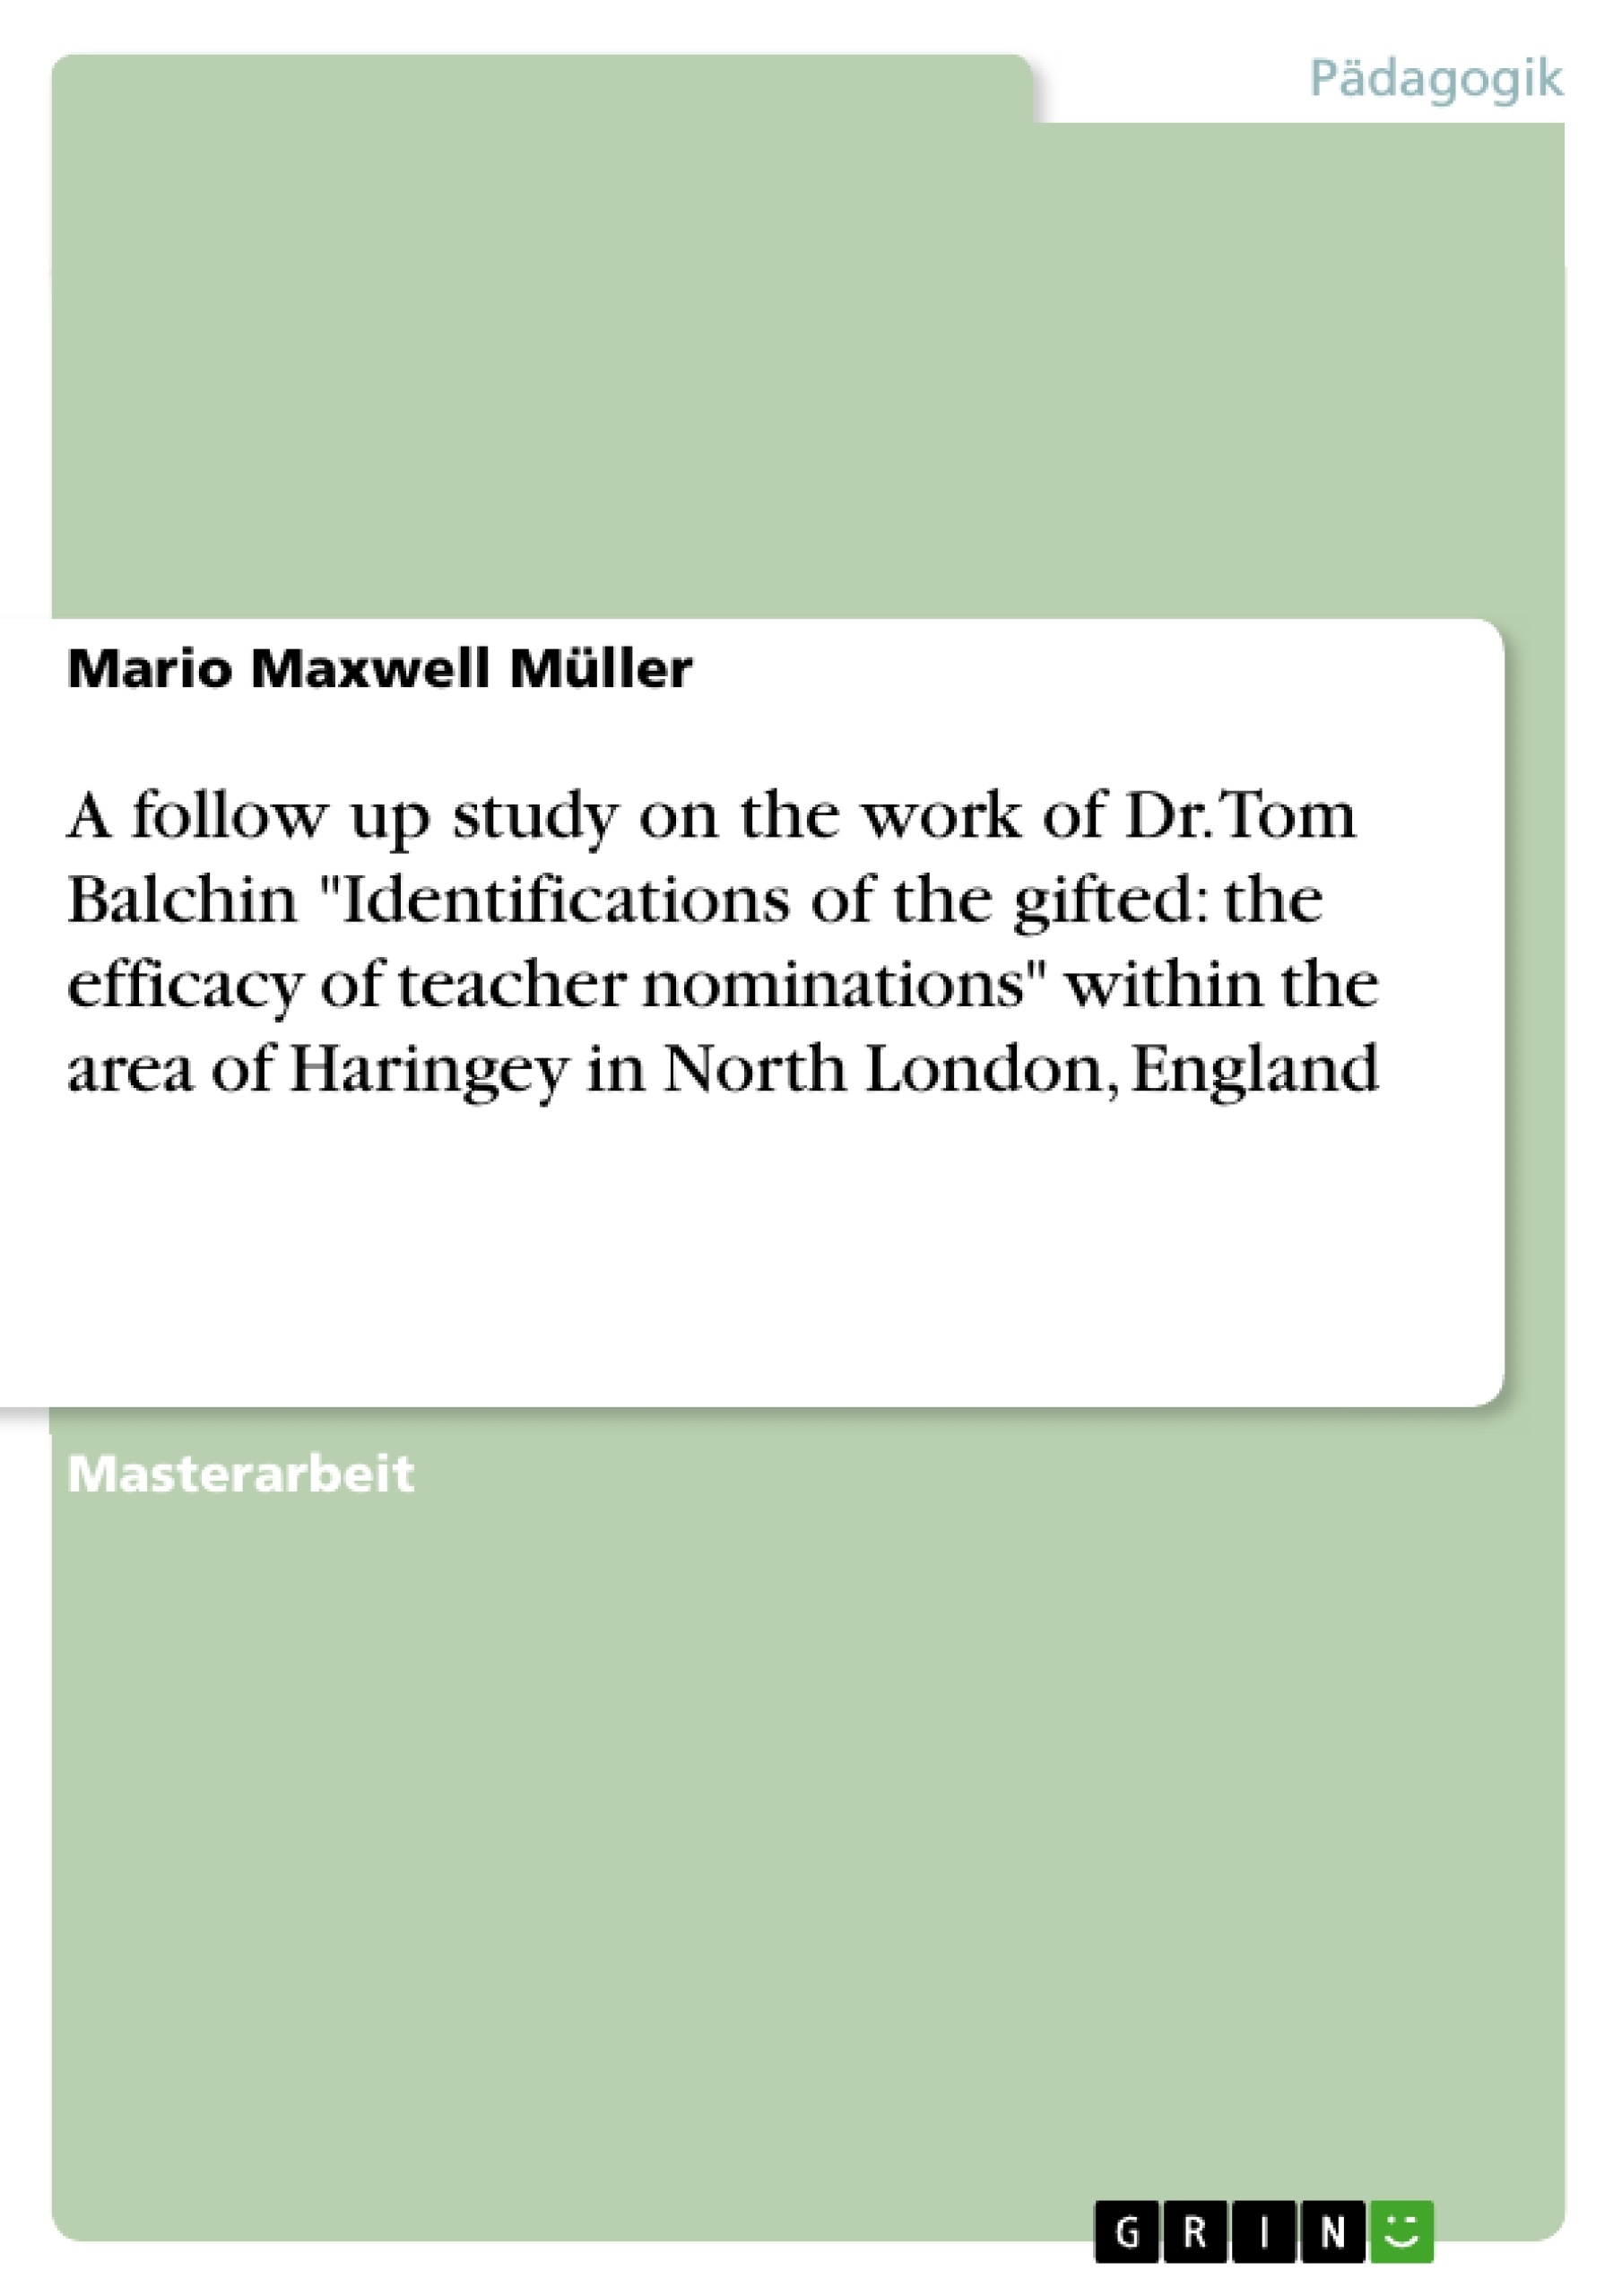 Titel: A follow up study on the work of Dr. Tom Balchin "Identifications of the gifted: the efficacy of teacher nominations" within the area of Haringey in North London, England